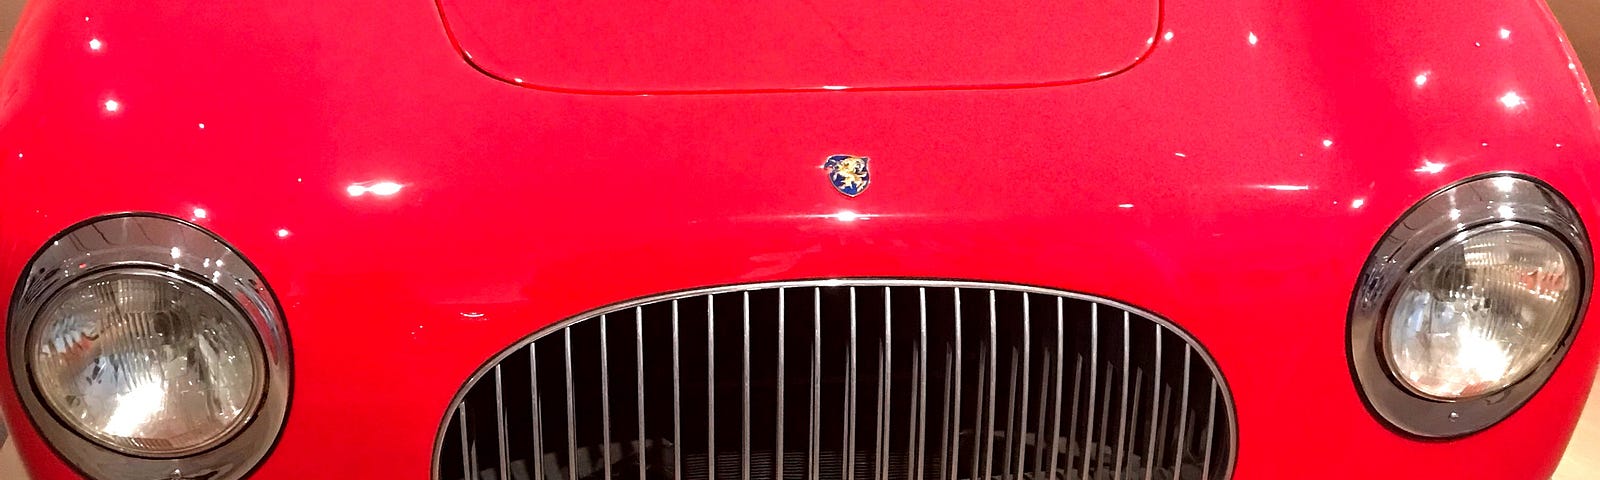 The red hood and grill of a Porsche.